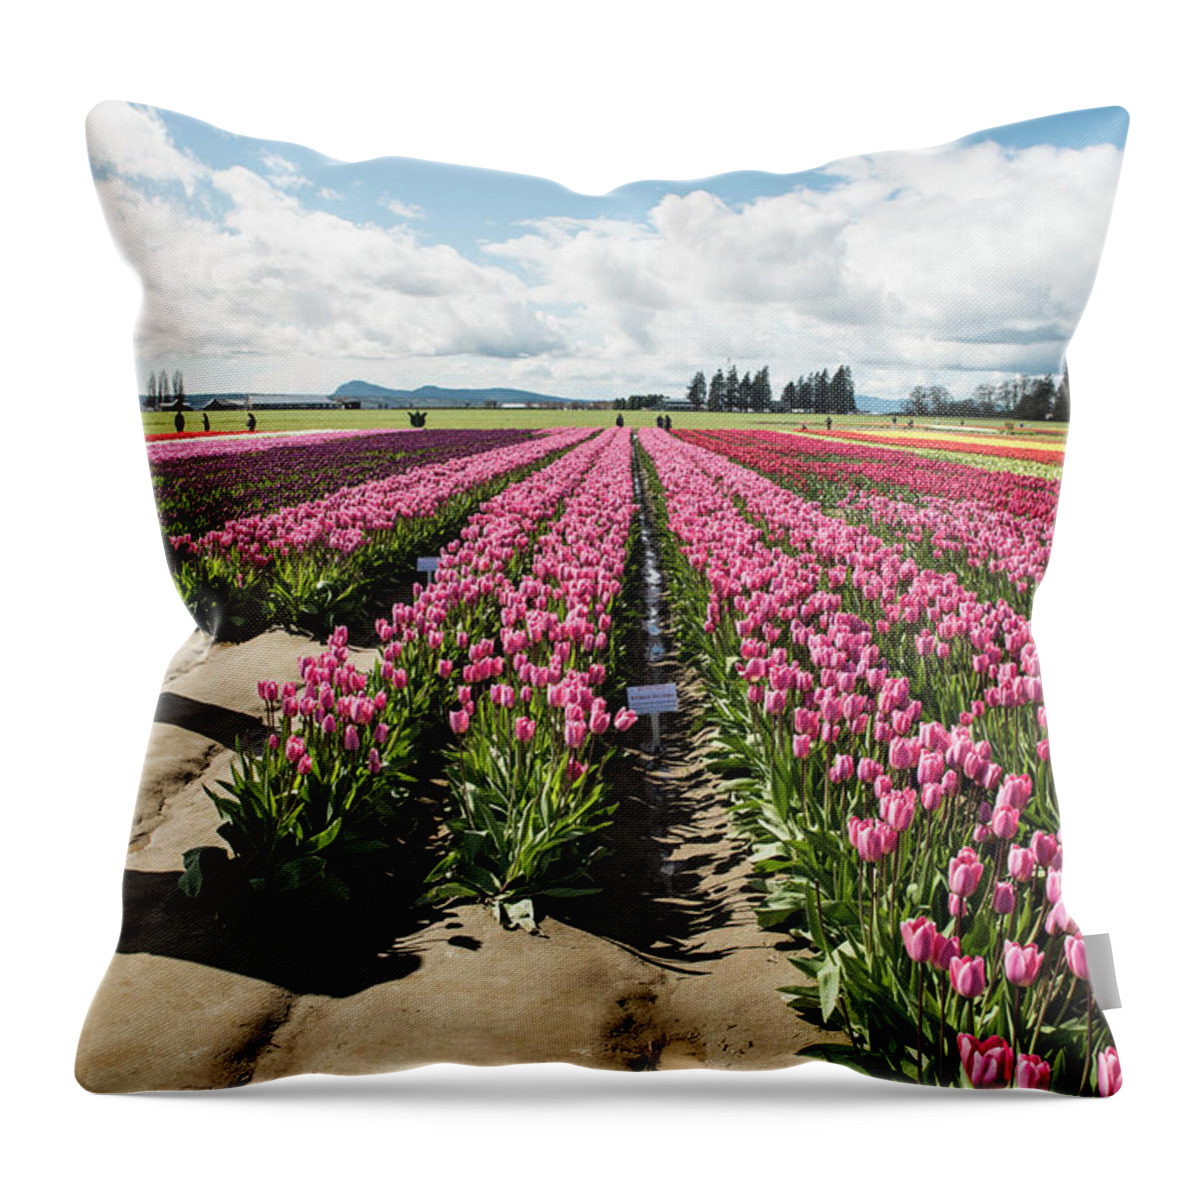 Passionate Pink Parallels Throw Pillow featuring the photograph Passionate Pink Parallels by Tom Cochran